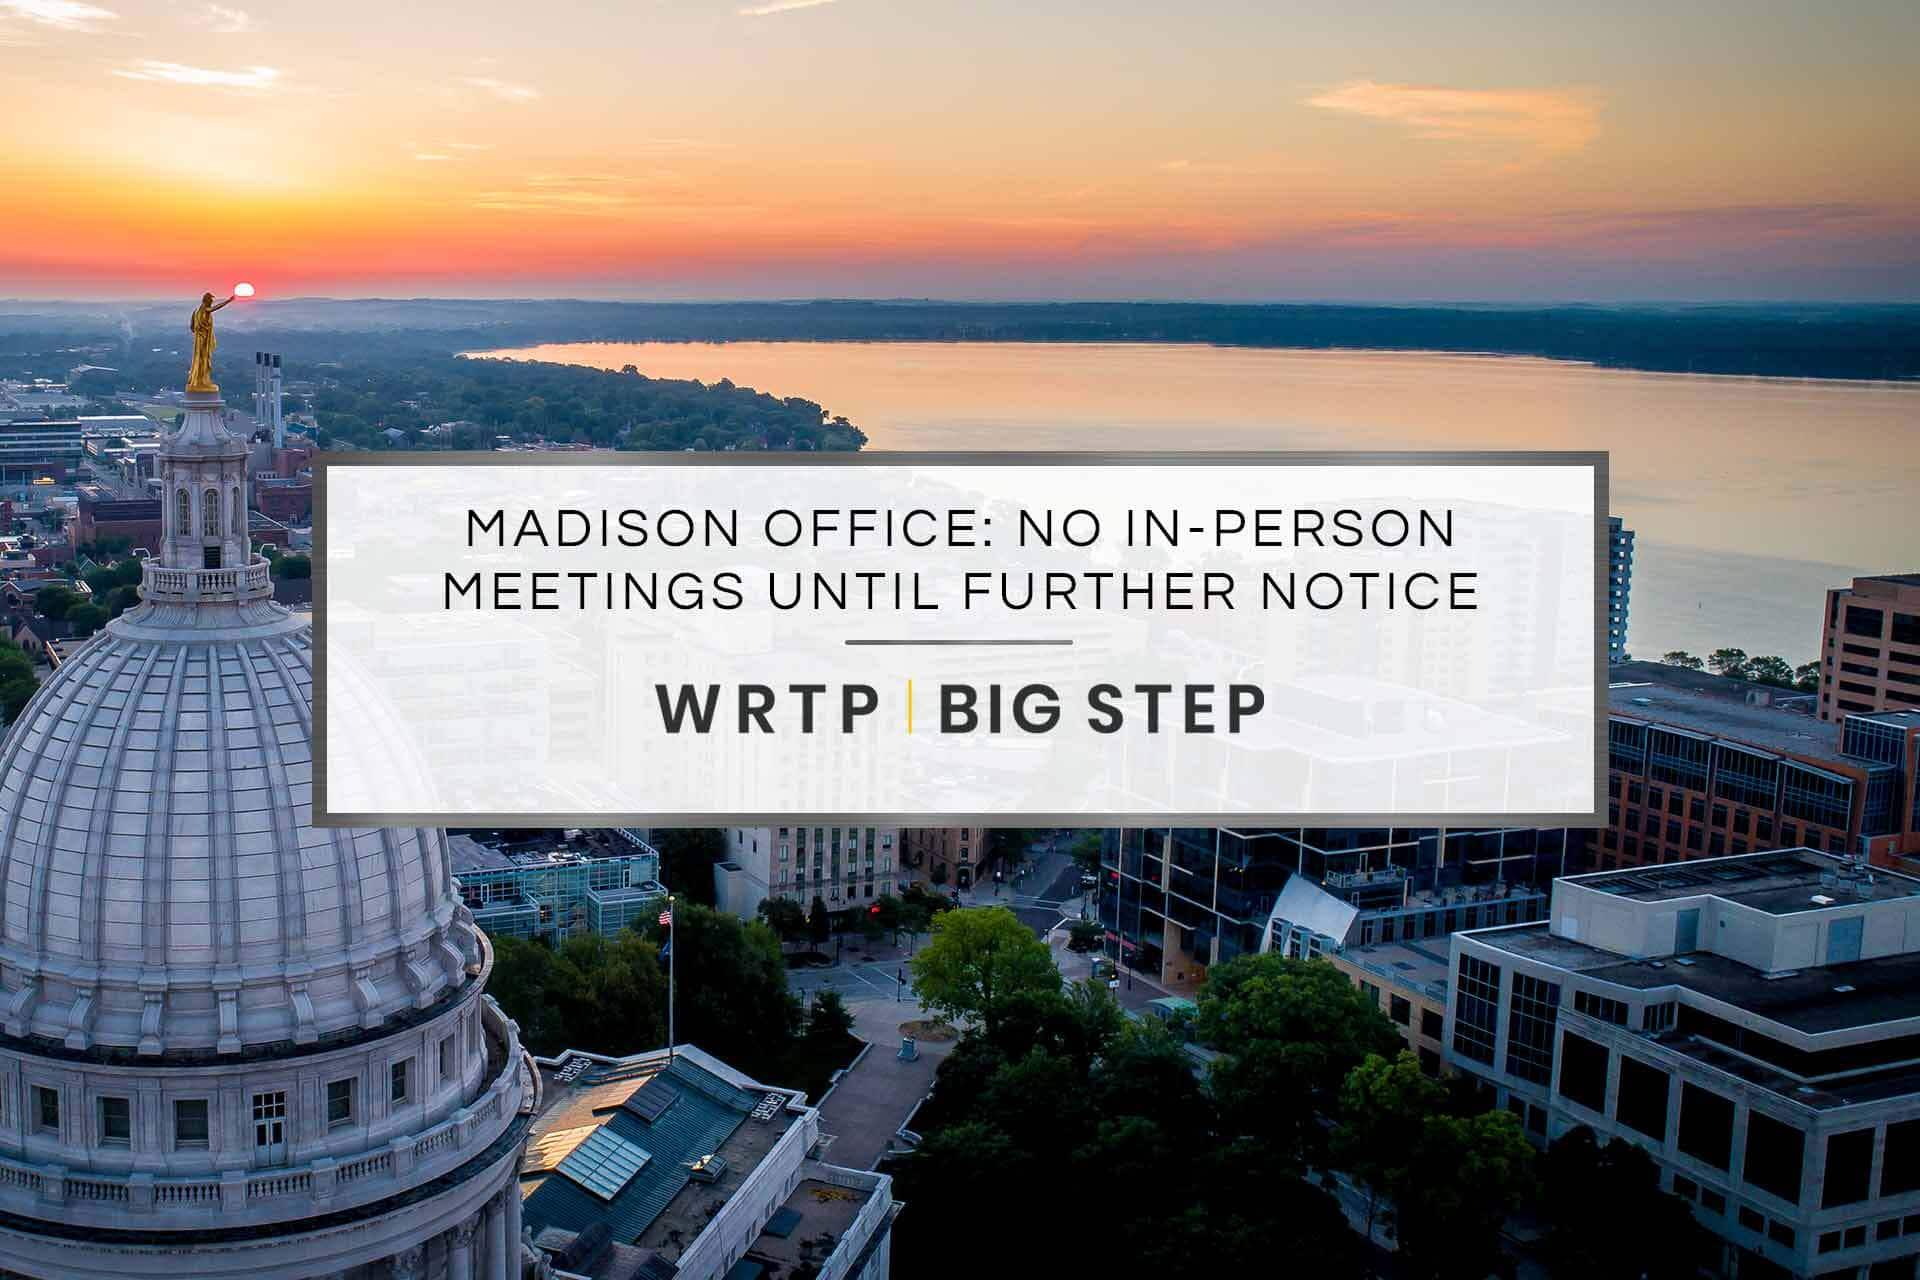 Madison Office: Will not hold in-person meetings until further notice